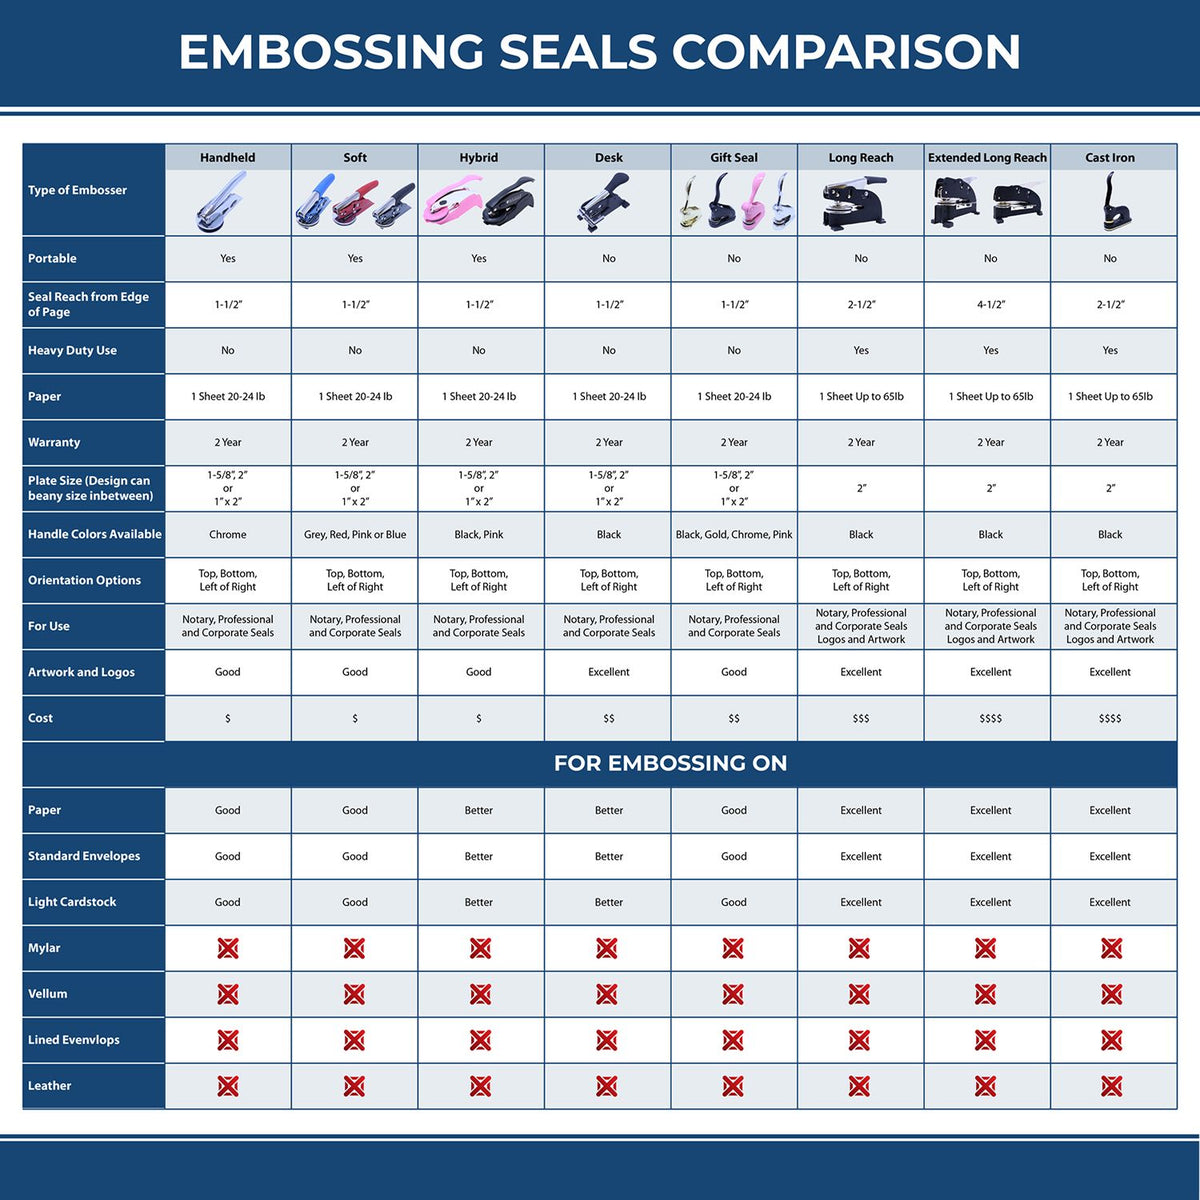 A comparison chart for the different types of mount models available for the Connecticut Desk Surveyor Seal Embosser.